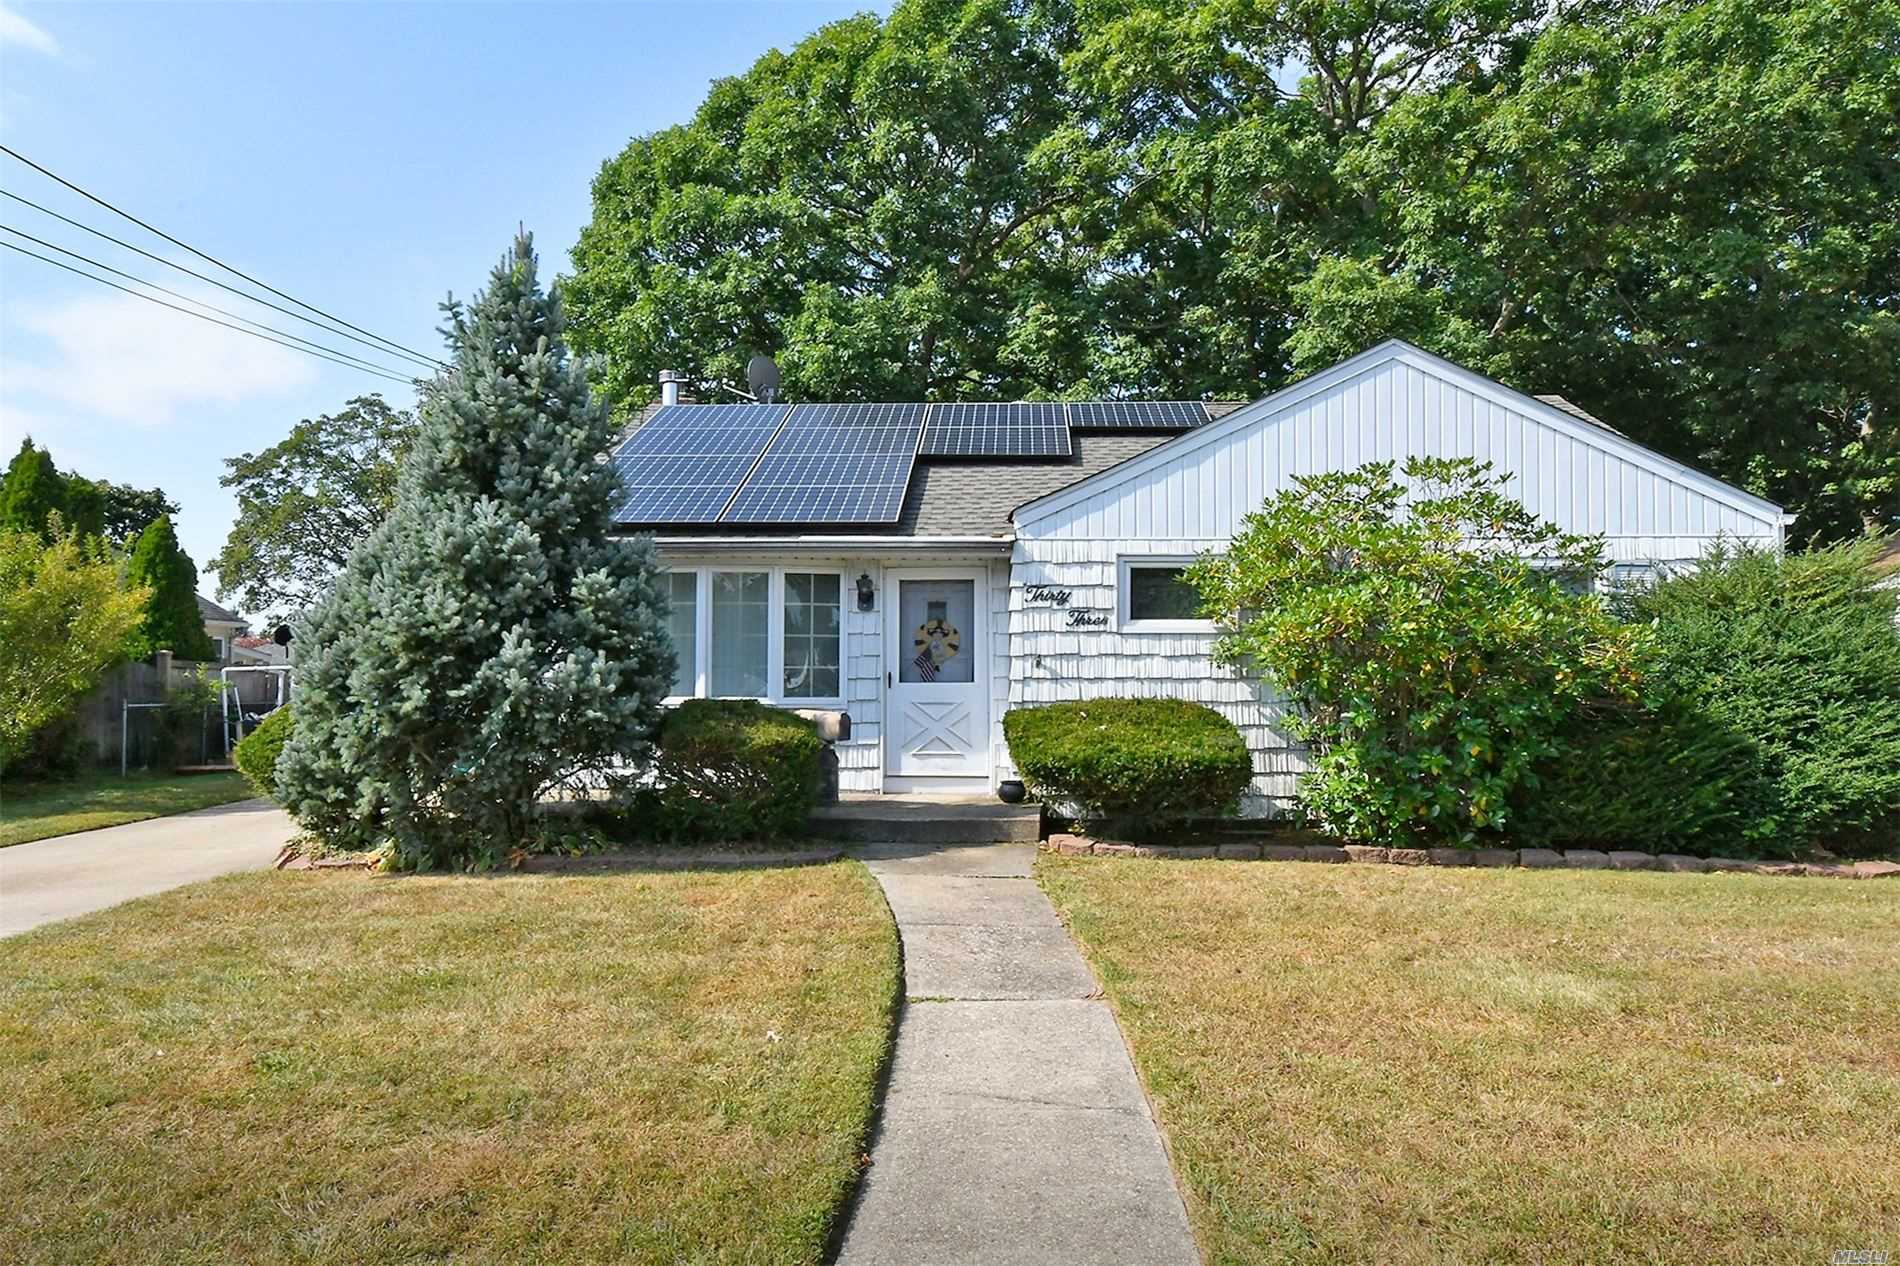 Great Ranch In Farmingdale w/ Huge Yard! Big Unfinished Basement, Backyard Access From Kitchen w/ Rear Wooden Deck, Detached Garage, Big Kitchen w/ Tons Of Potential! Updated Roof, Windows & Solar Panels, Updated Windows, Wood Burning Stove,  Mid Block Location! Don&rsquo;t Miss Out Won&rsquo;t Last!